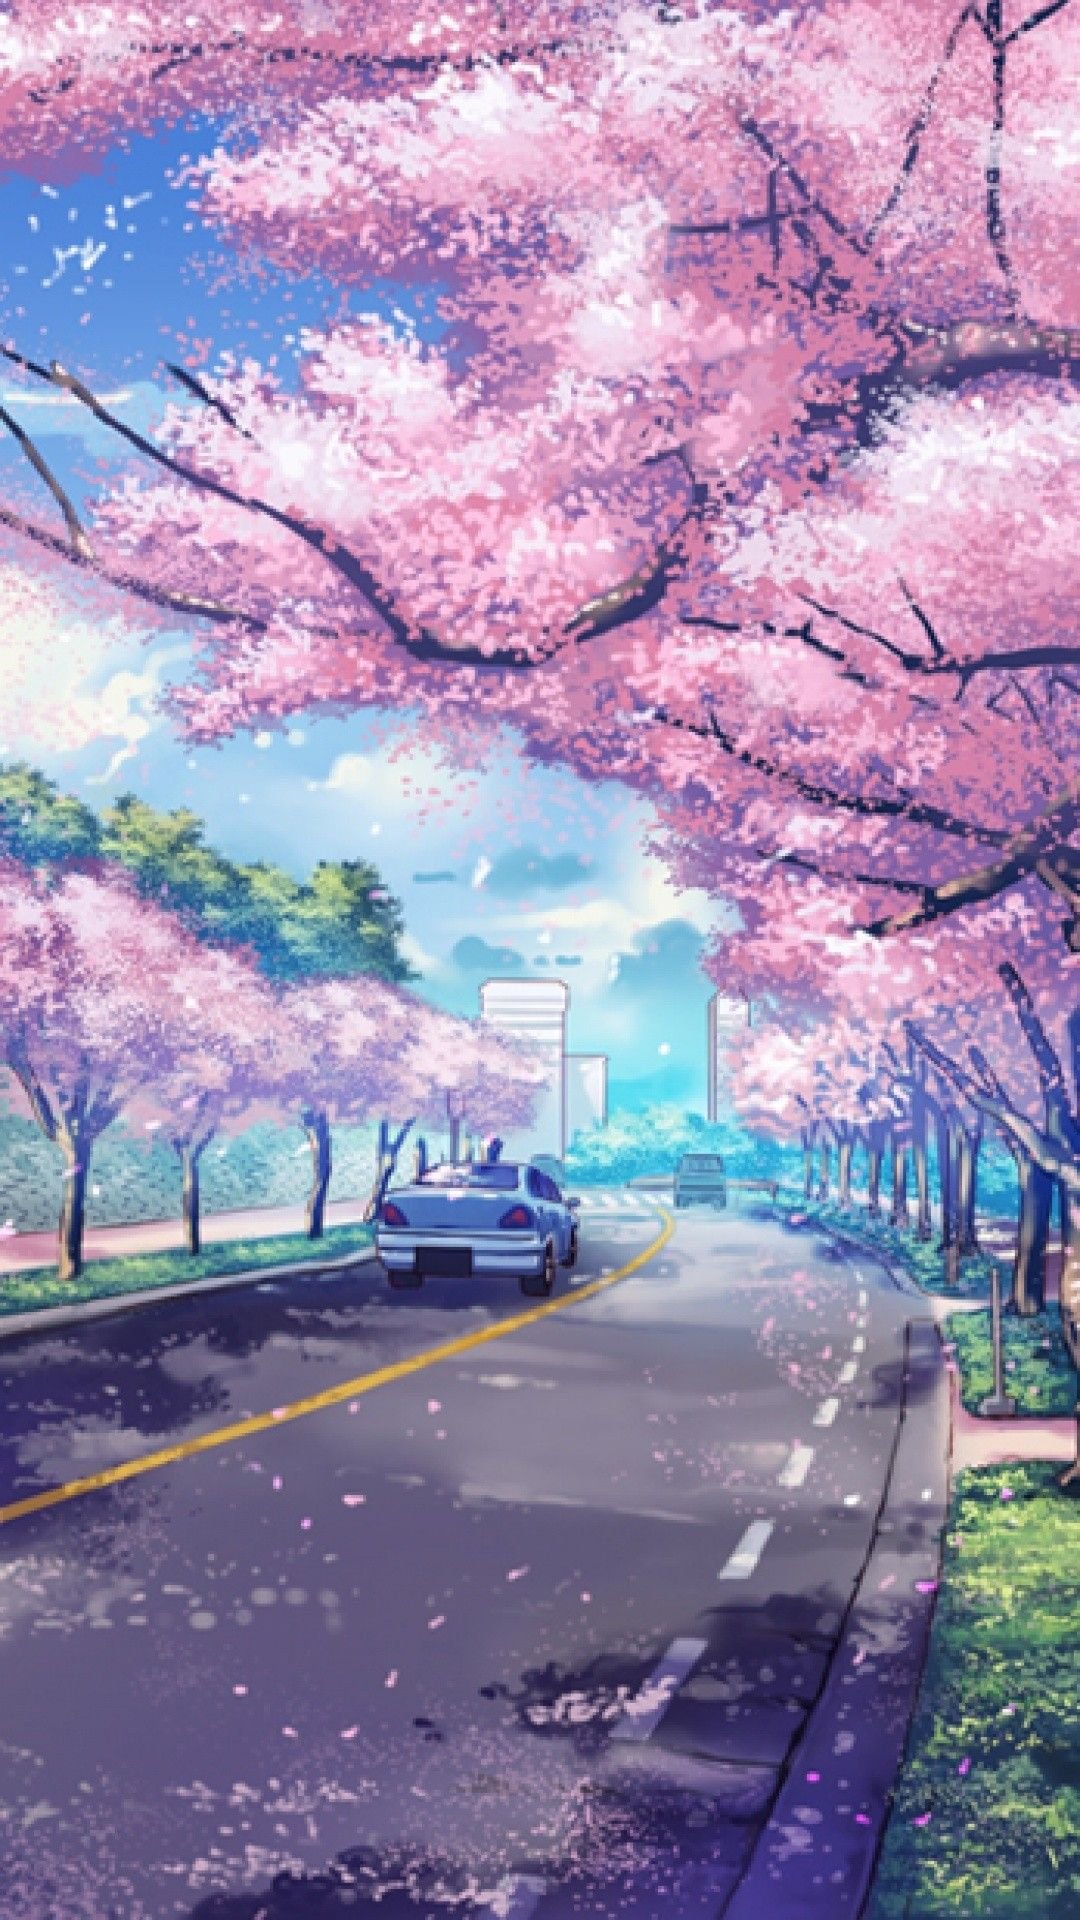 100+] Aesthetic Anime Scenery Wallpapers | Wallpapers.com